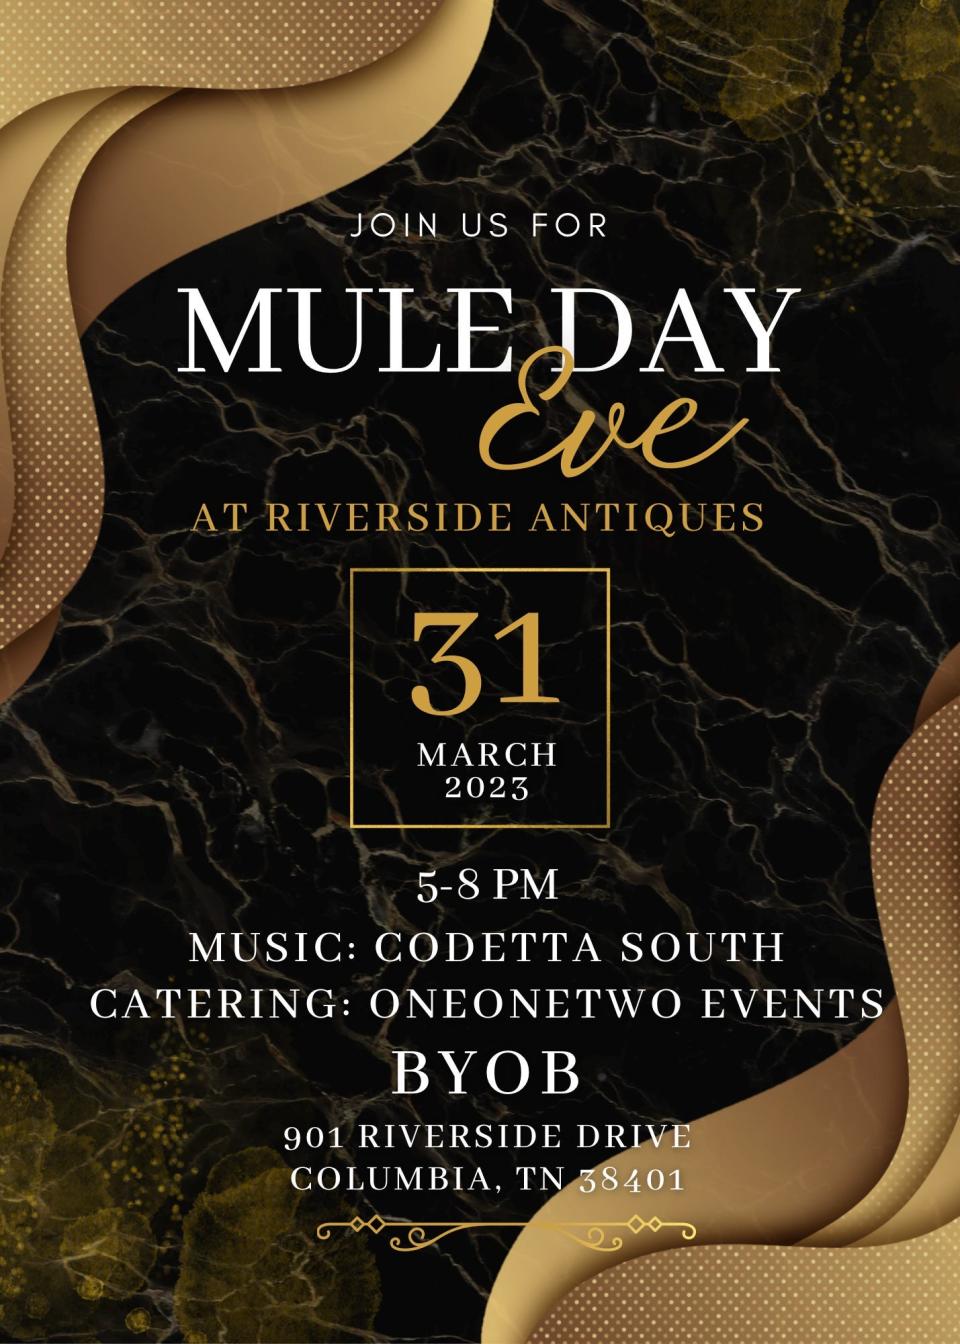 Celebrate Mule Day prior to Saturday's parade at Riverside Antiques, who will host a Mule Day Eve night of fun, with shopping, food and live music.